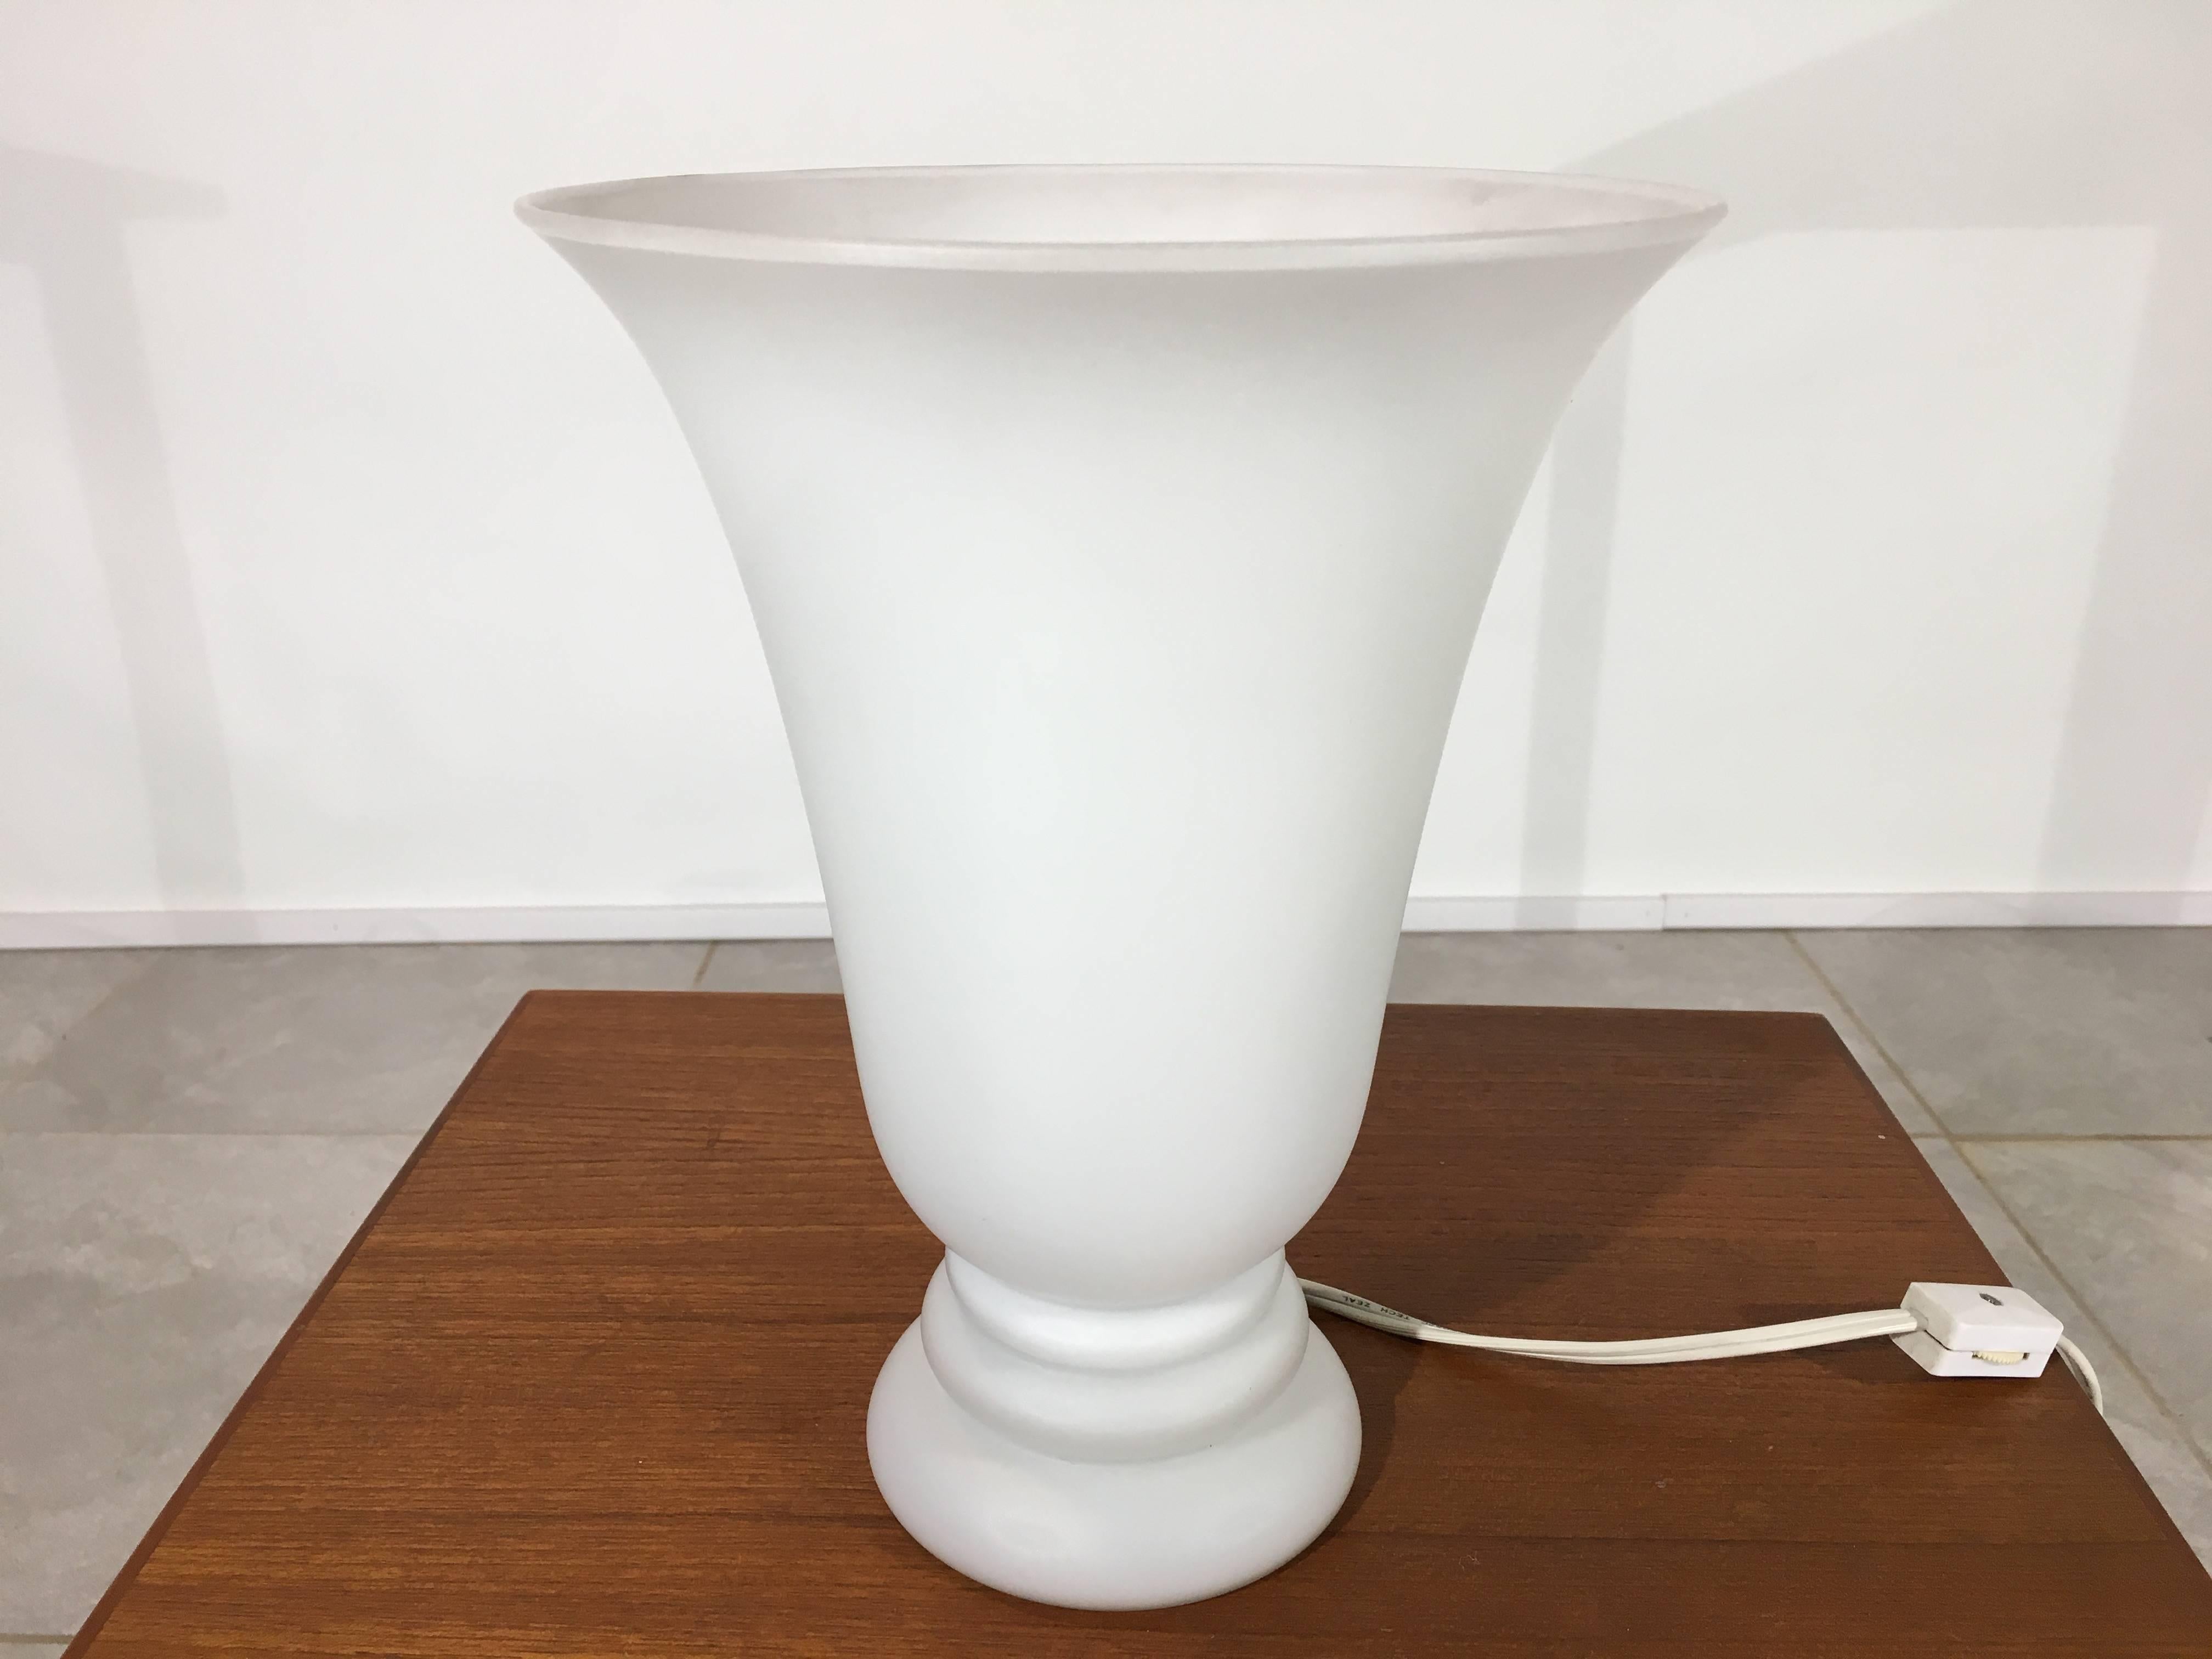 A beautiful frosted glass table lamp, handblown in France by CVV Vianne in the 1970s.